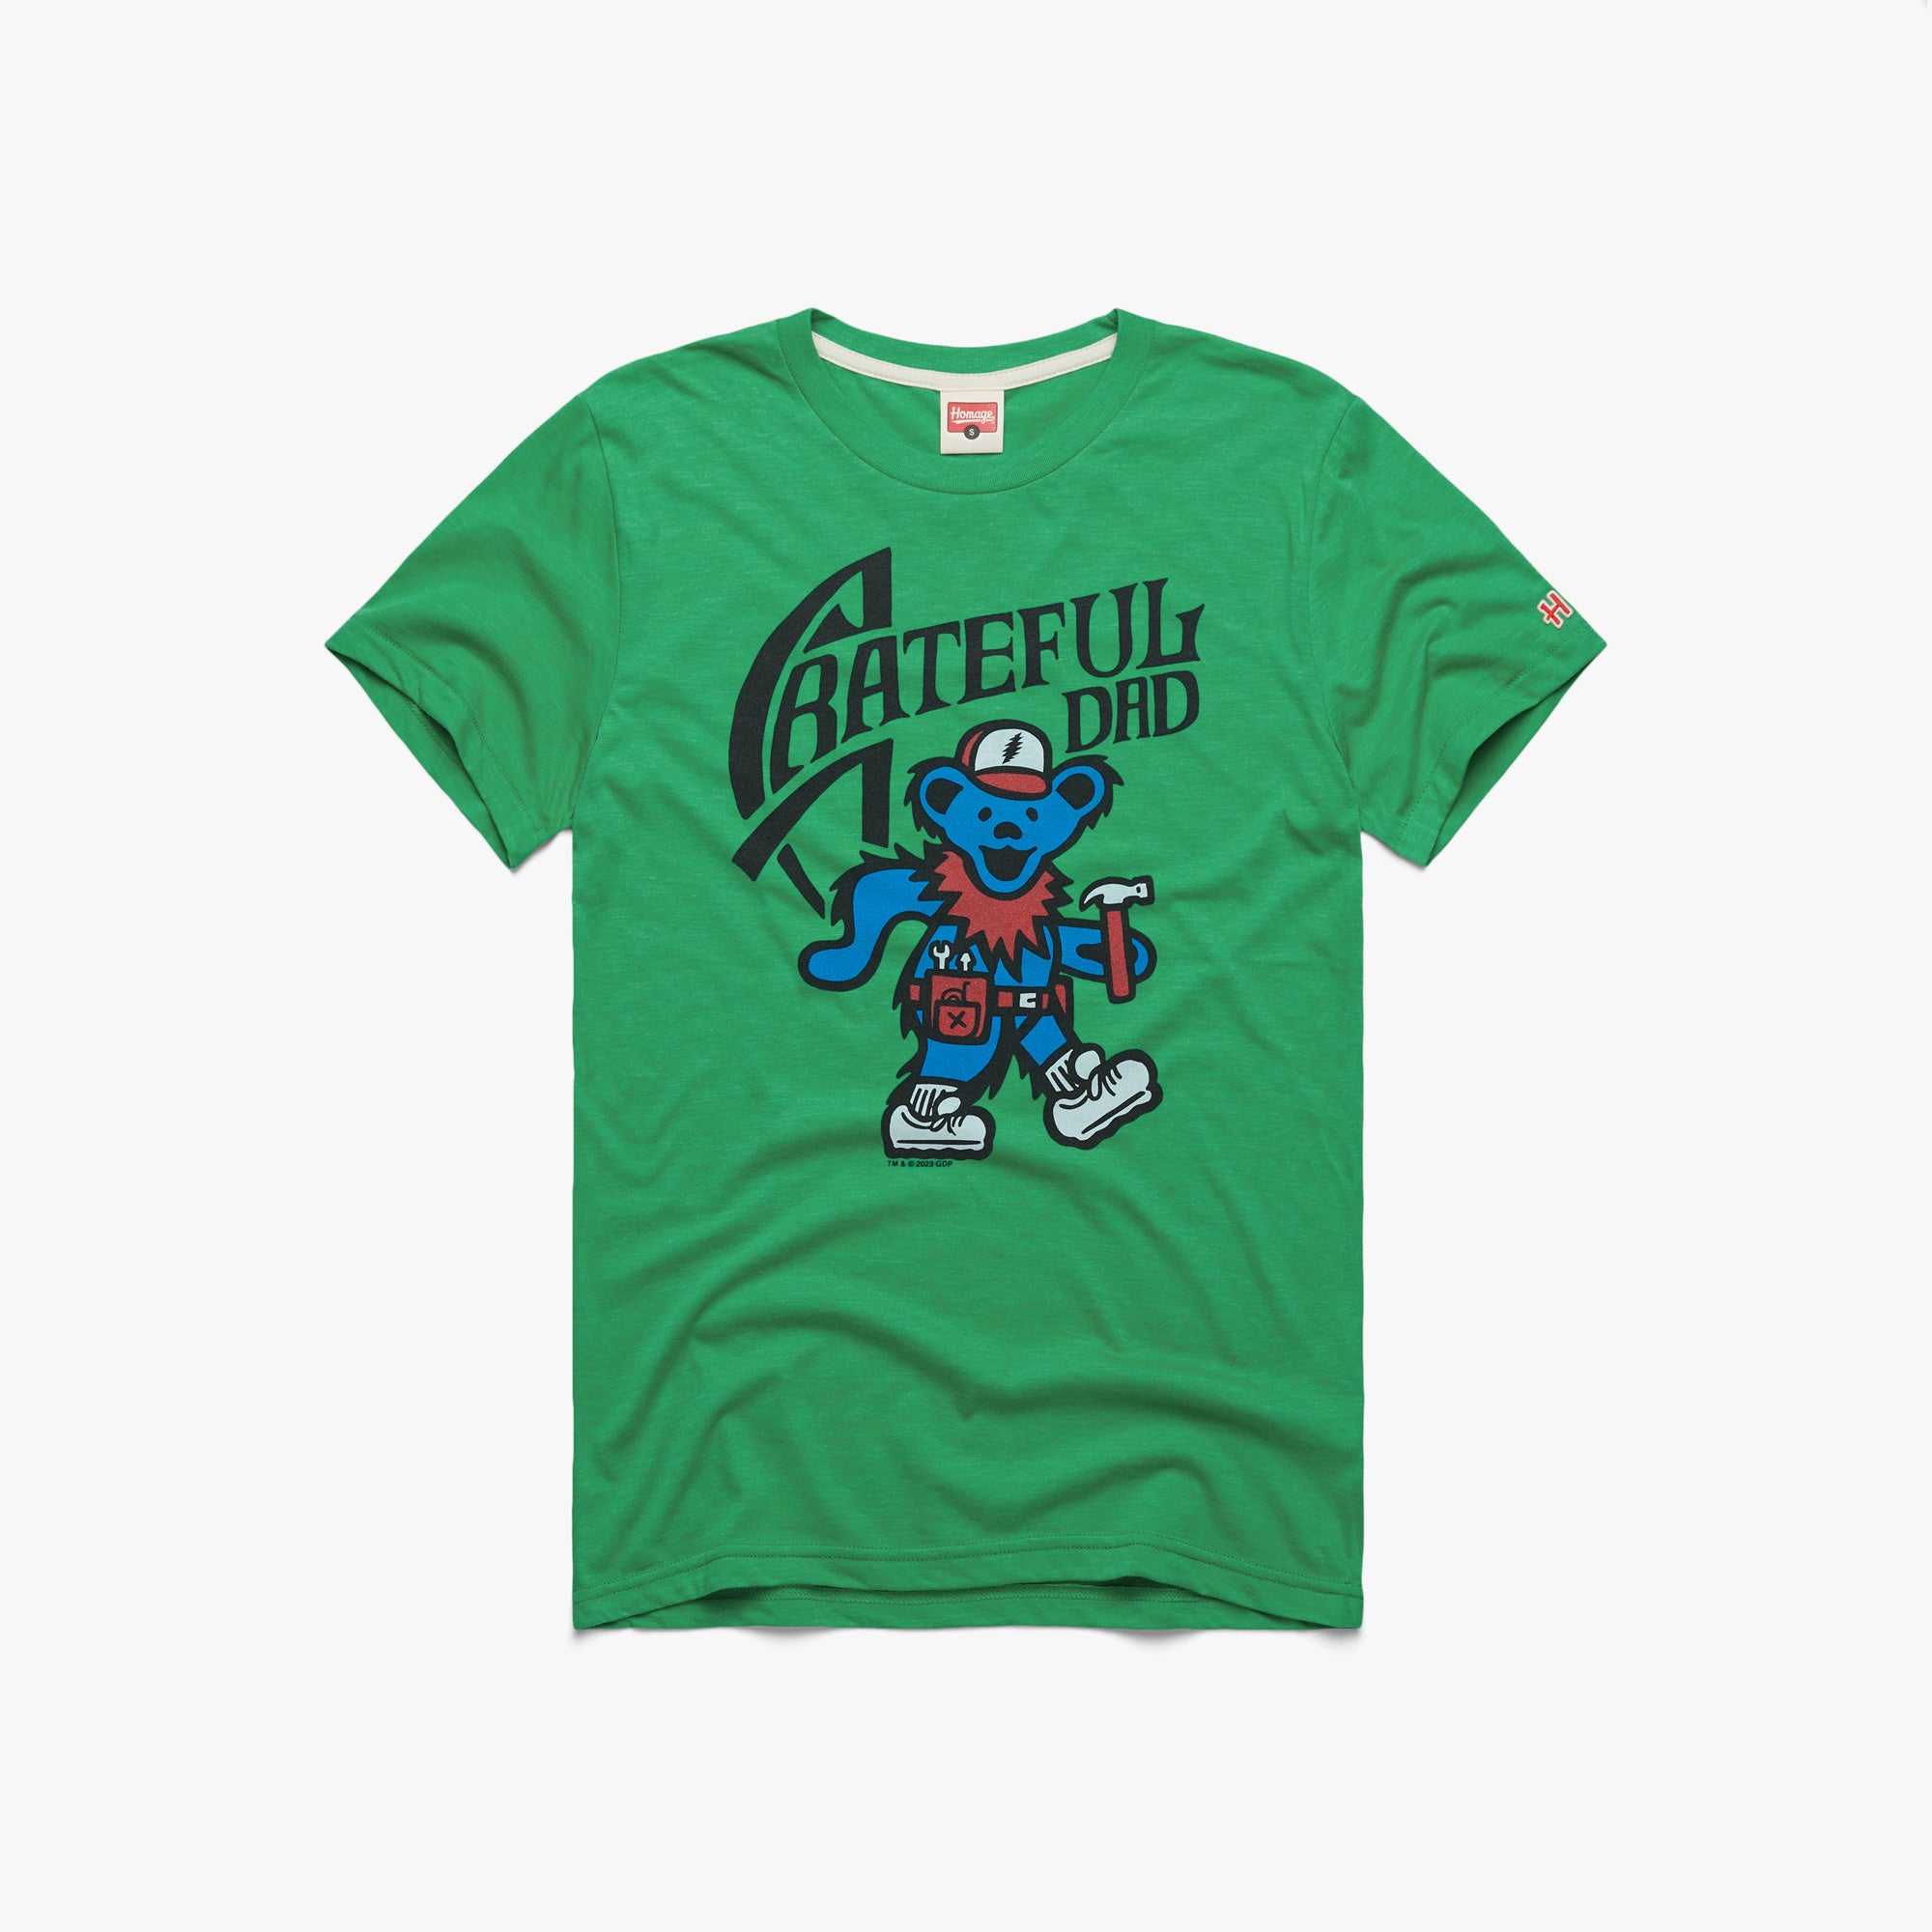 Grateful Dad T-Shirt from Homage. | Green | Vintage Apparel from Homage.